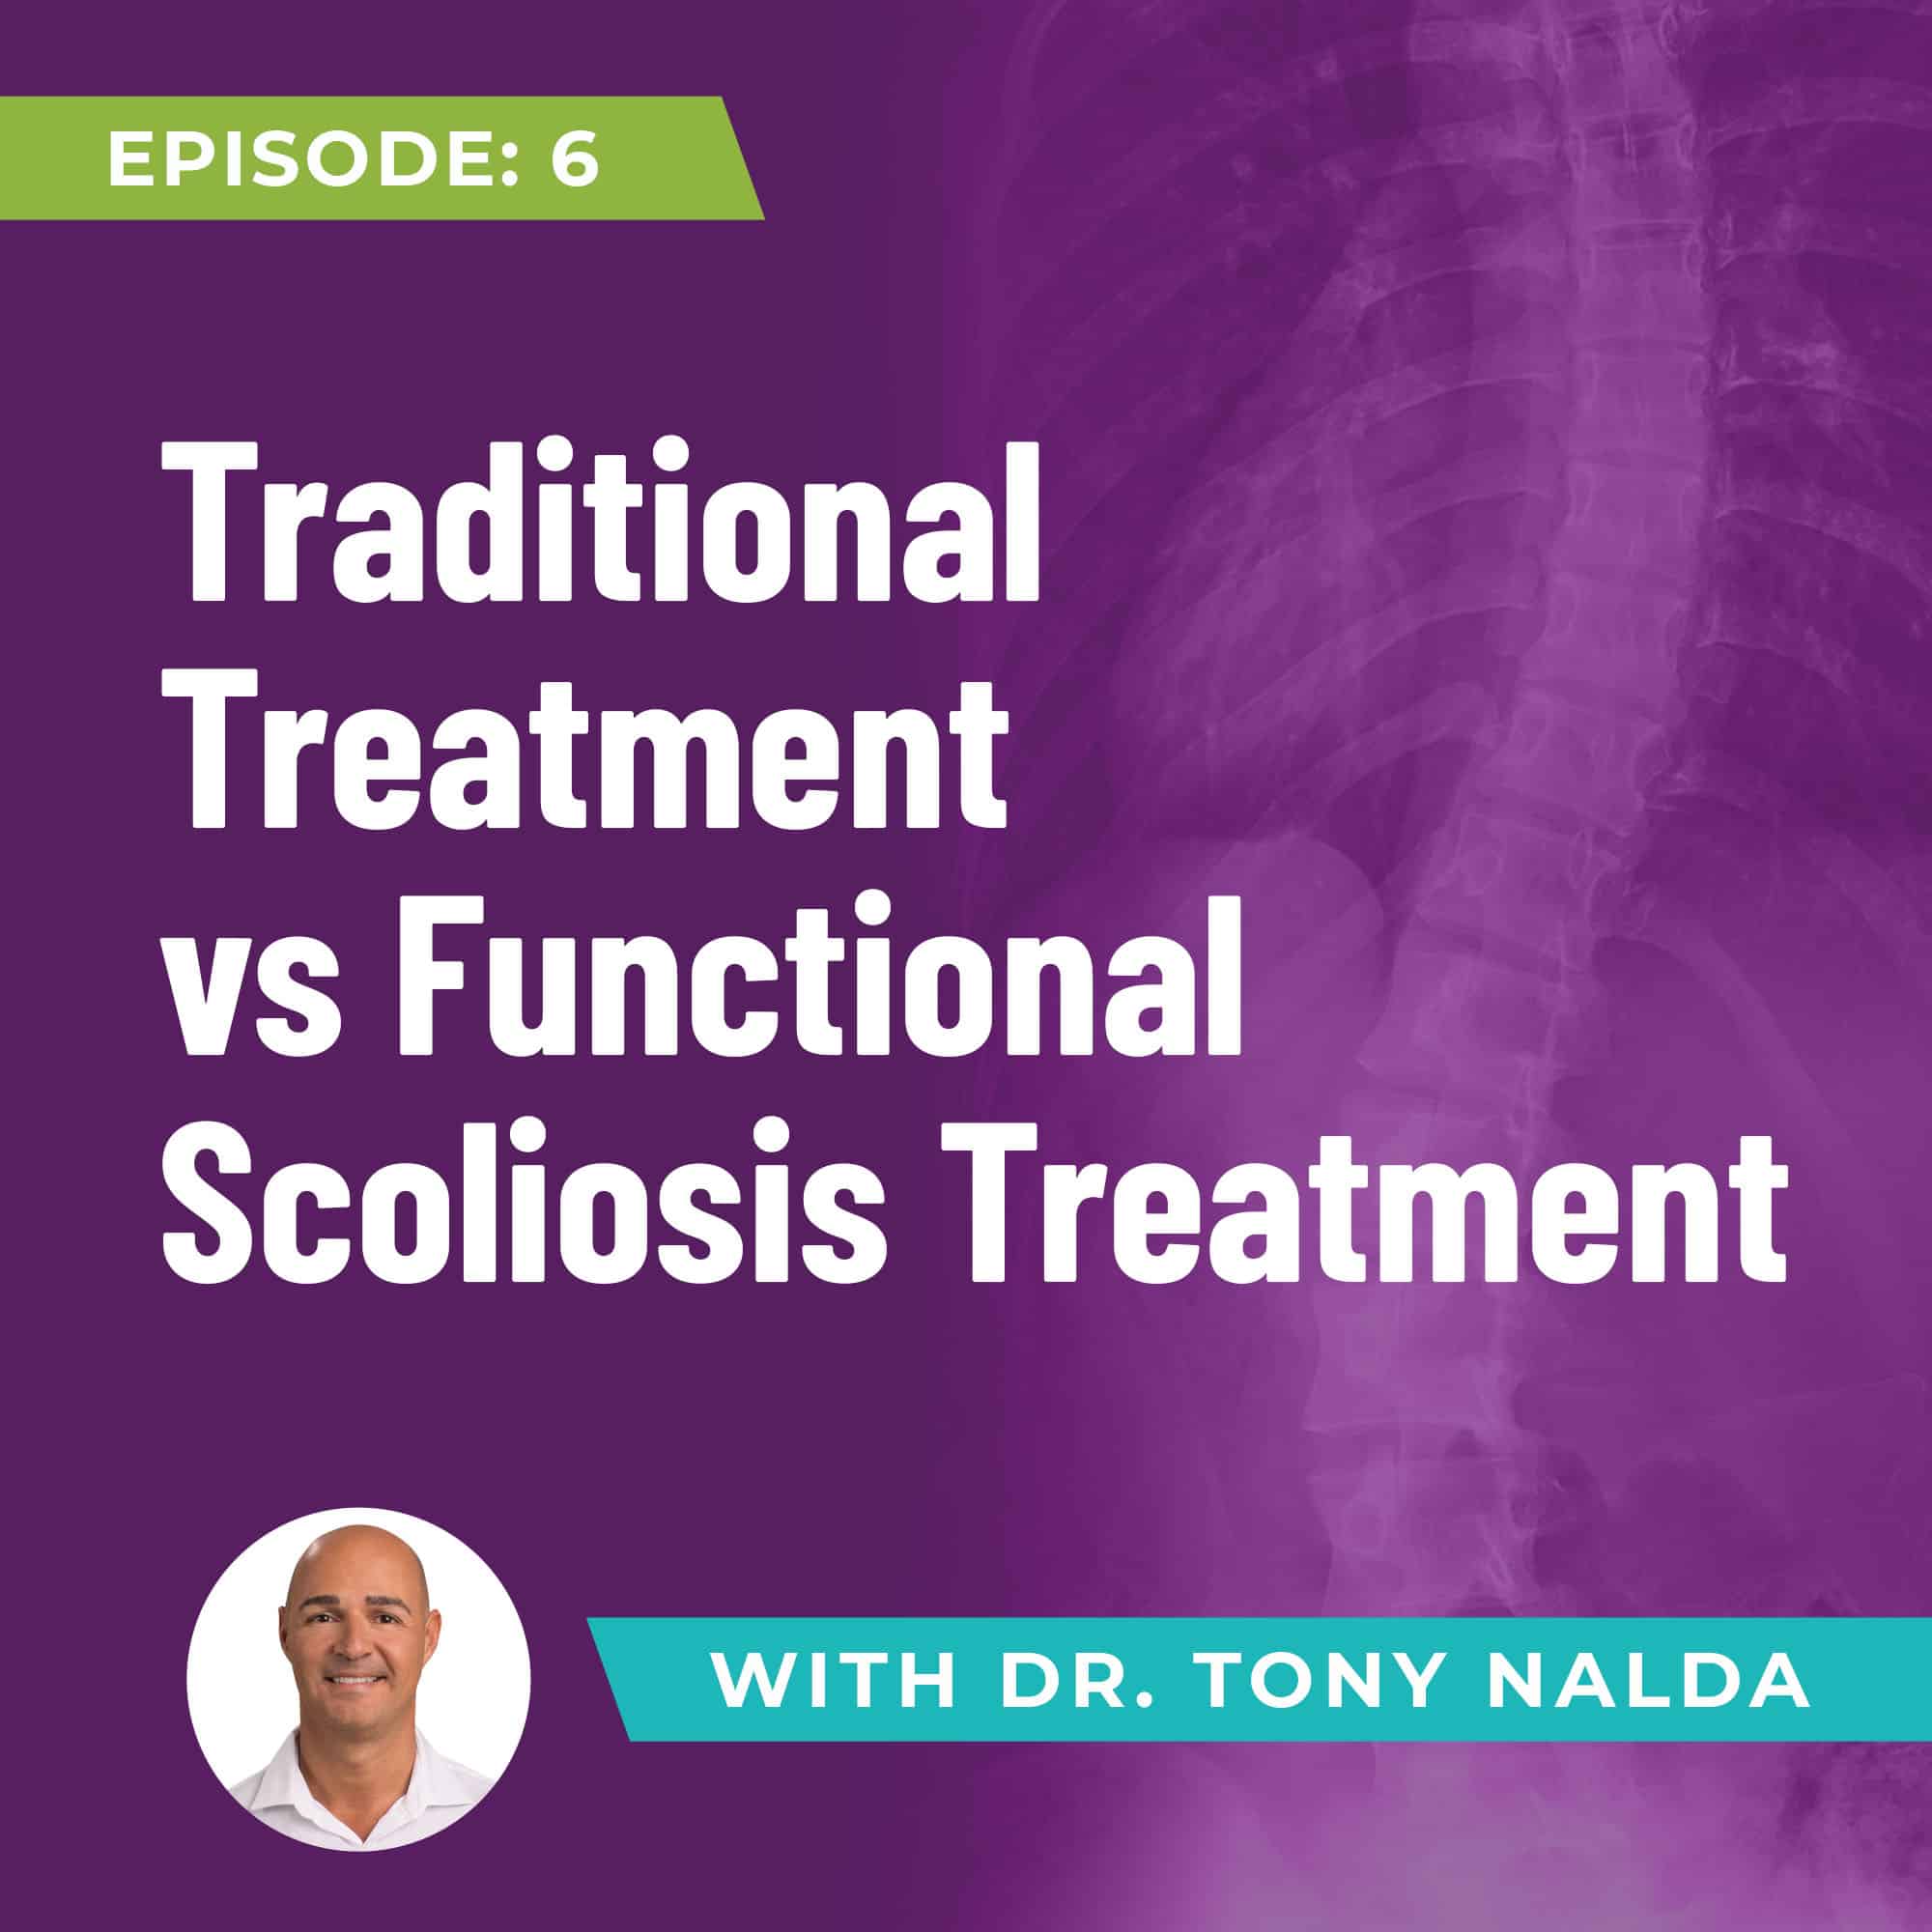 6 Traditional Treatment vs Functional Scoliosis Treatment